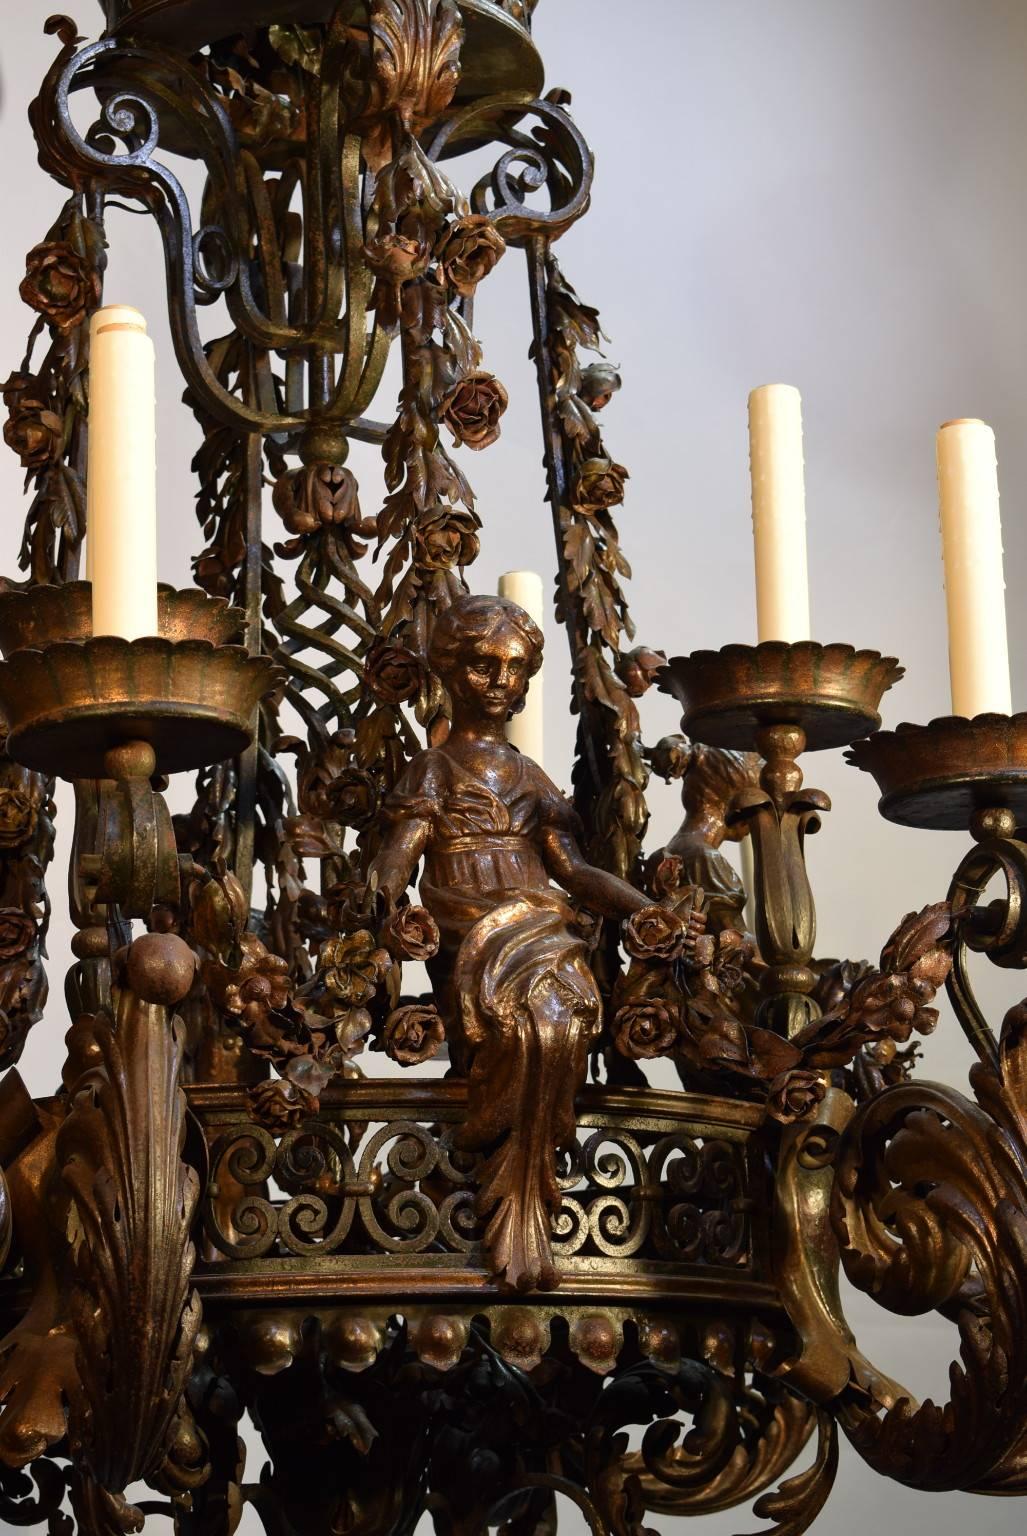 When you describe something as outrageous, sometimes that is an exaggeration. But there is no better way of describing this phenomenal fixture. It is a late 18th century all iron chandelier, featuring fire gilded maidens and incredible repousse